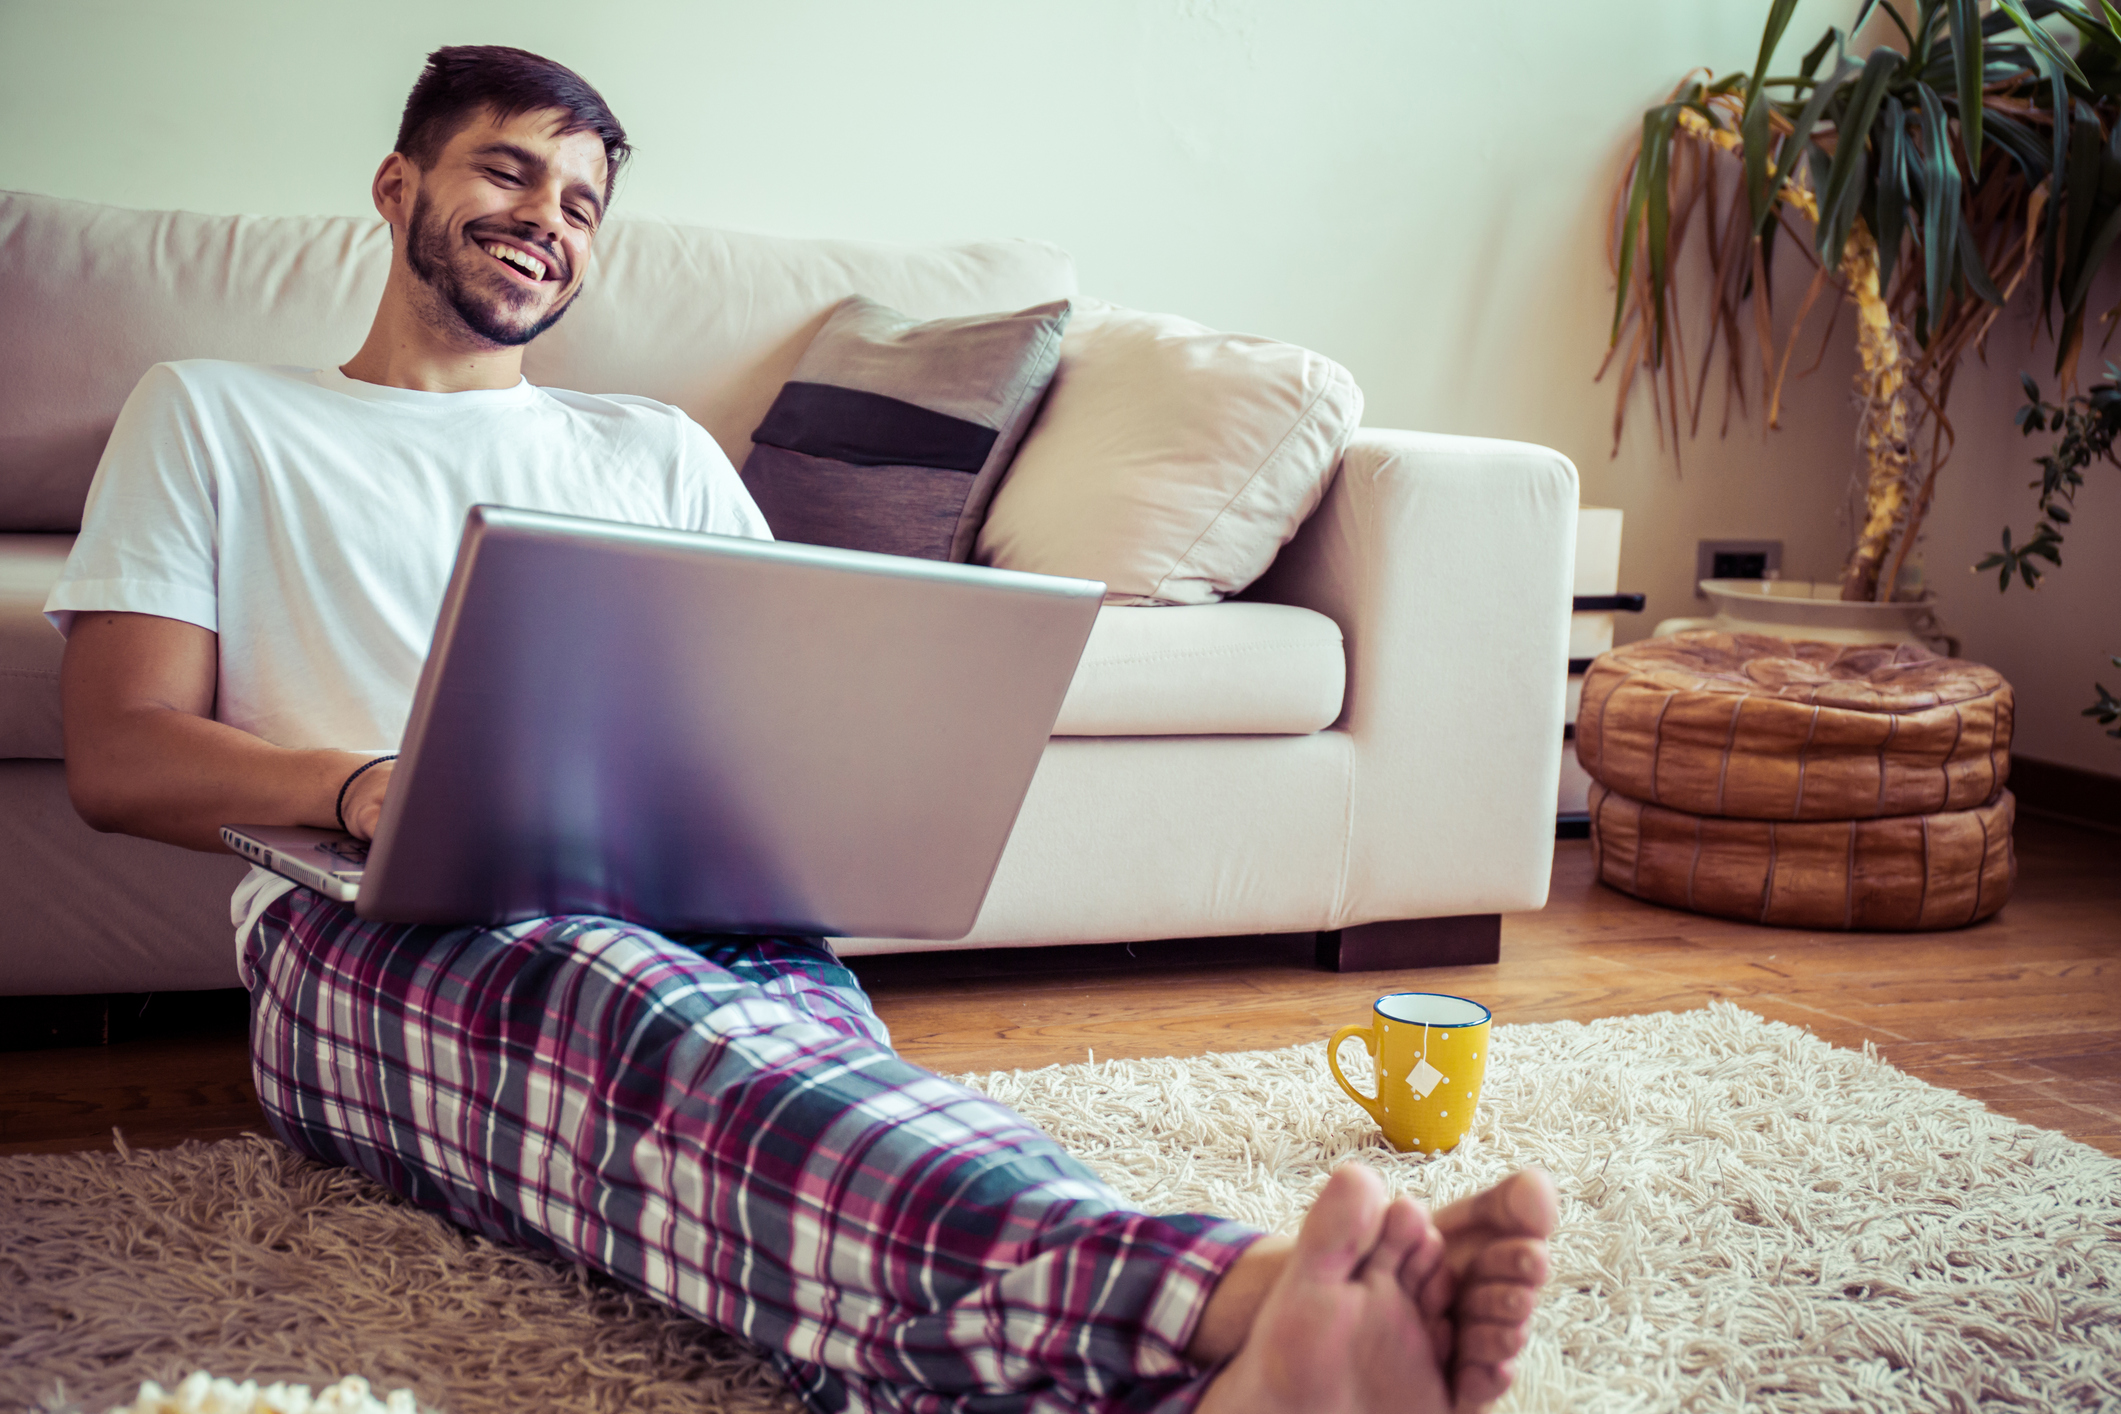 Man sitting in living room smiling at computer